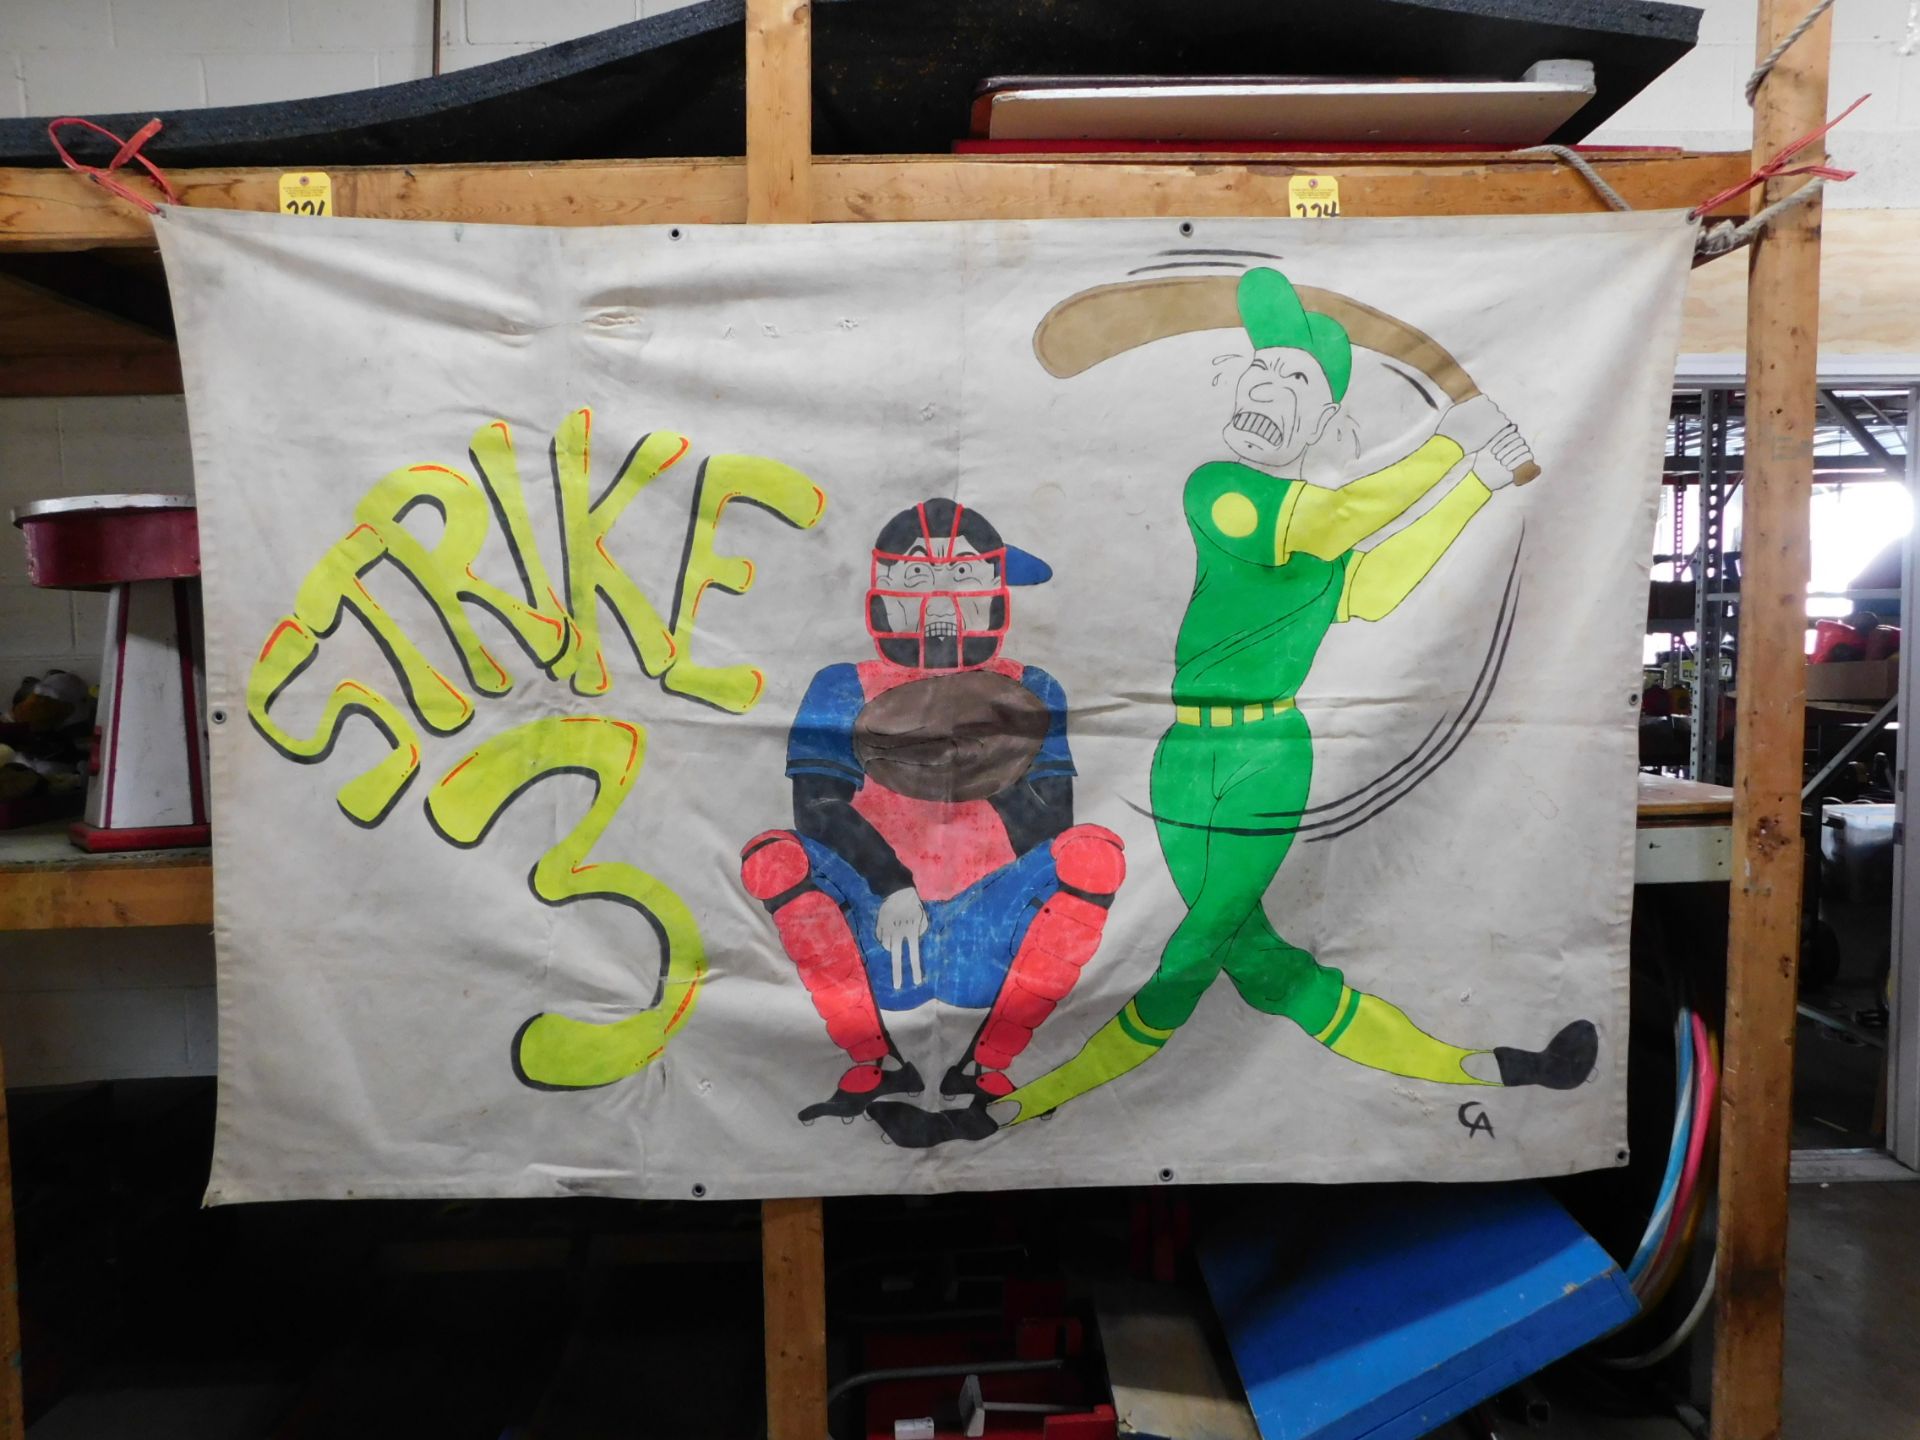 Strike 3 Game Backdrop, hand Painted 7' X 5' Tall - Image 2 of 2